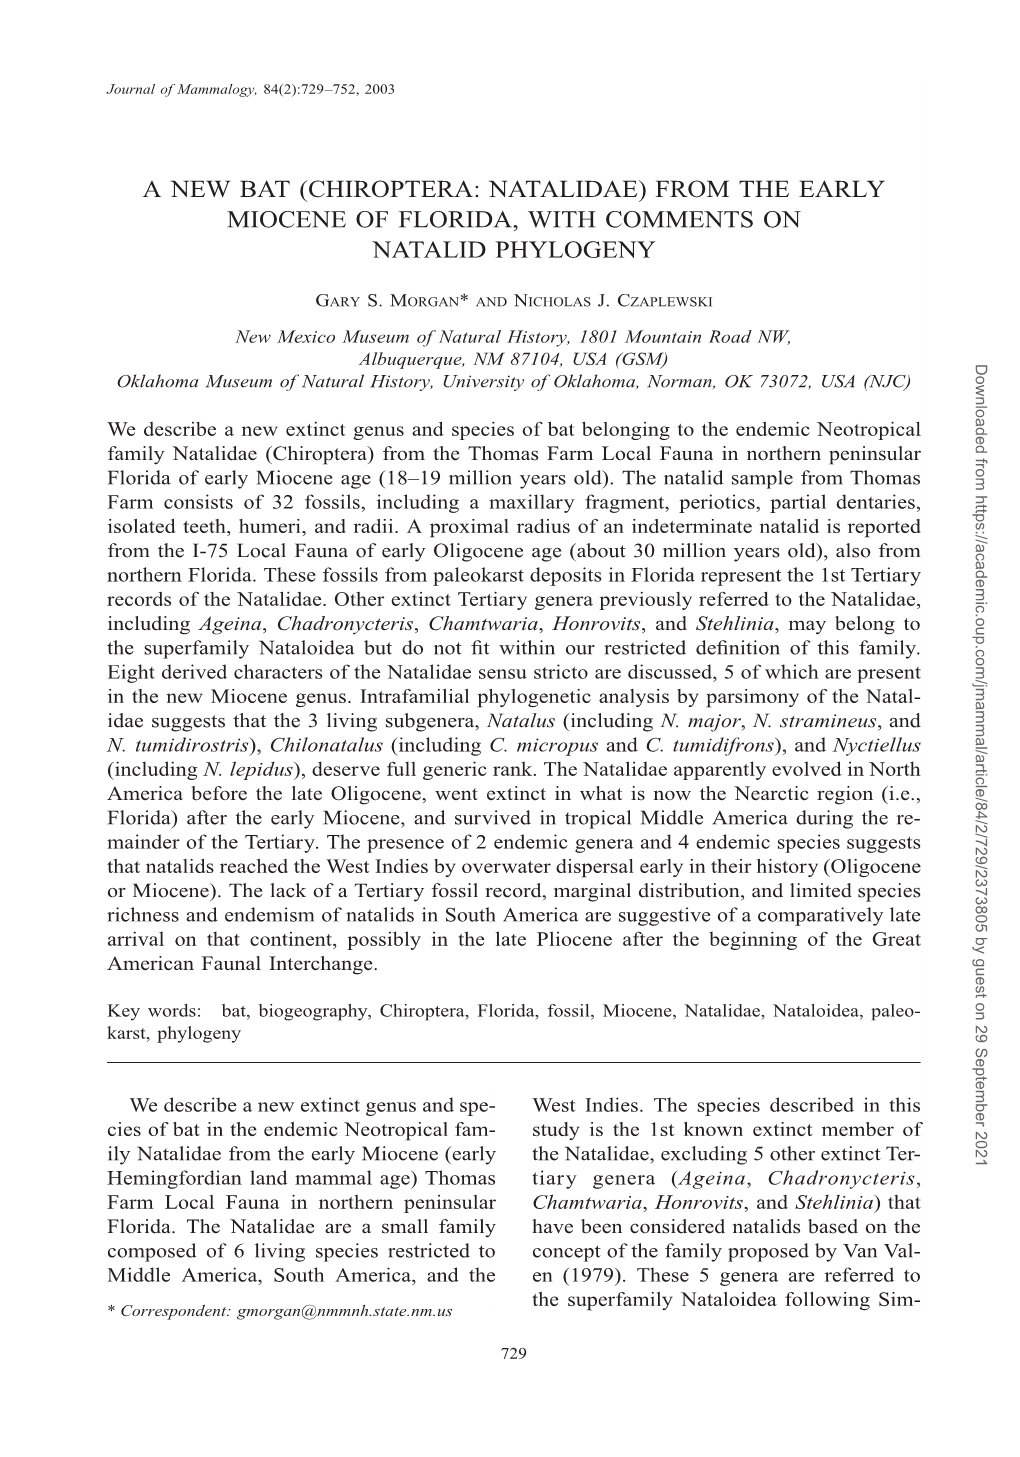 (Chiroptera: Natalidae) from the Early Miocene of Florida, with Comments on Natalid Phylogeny